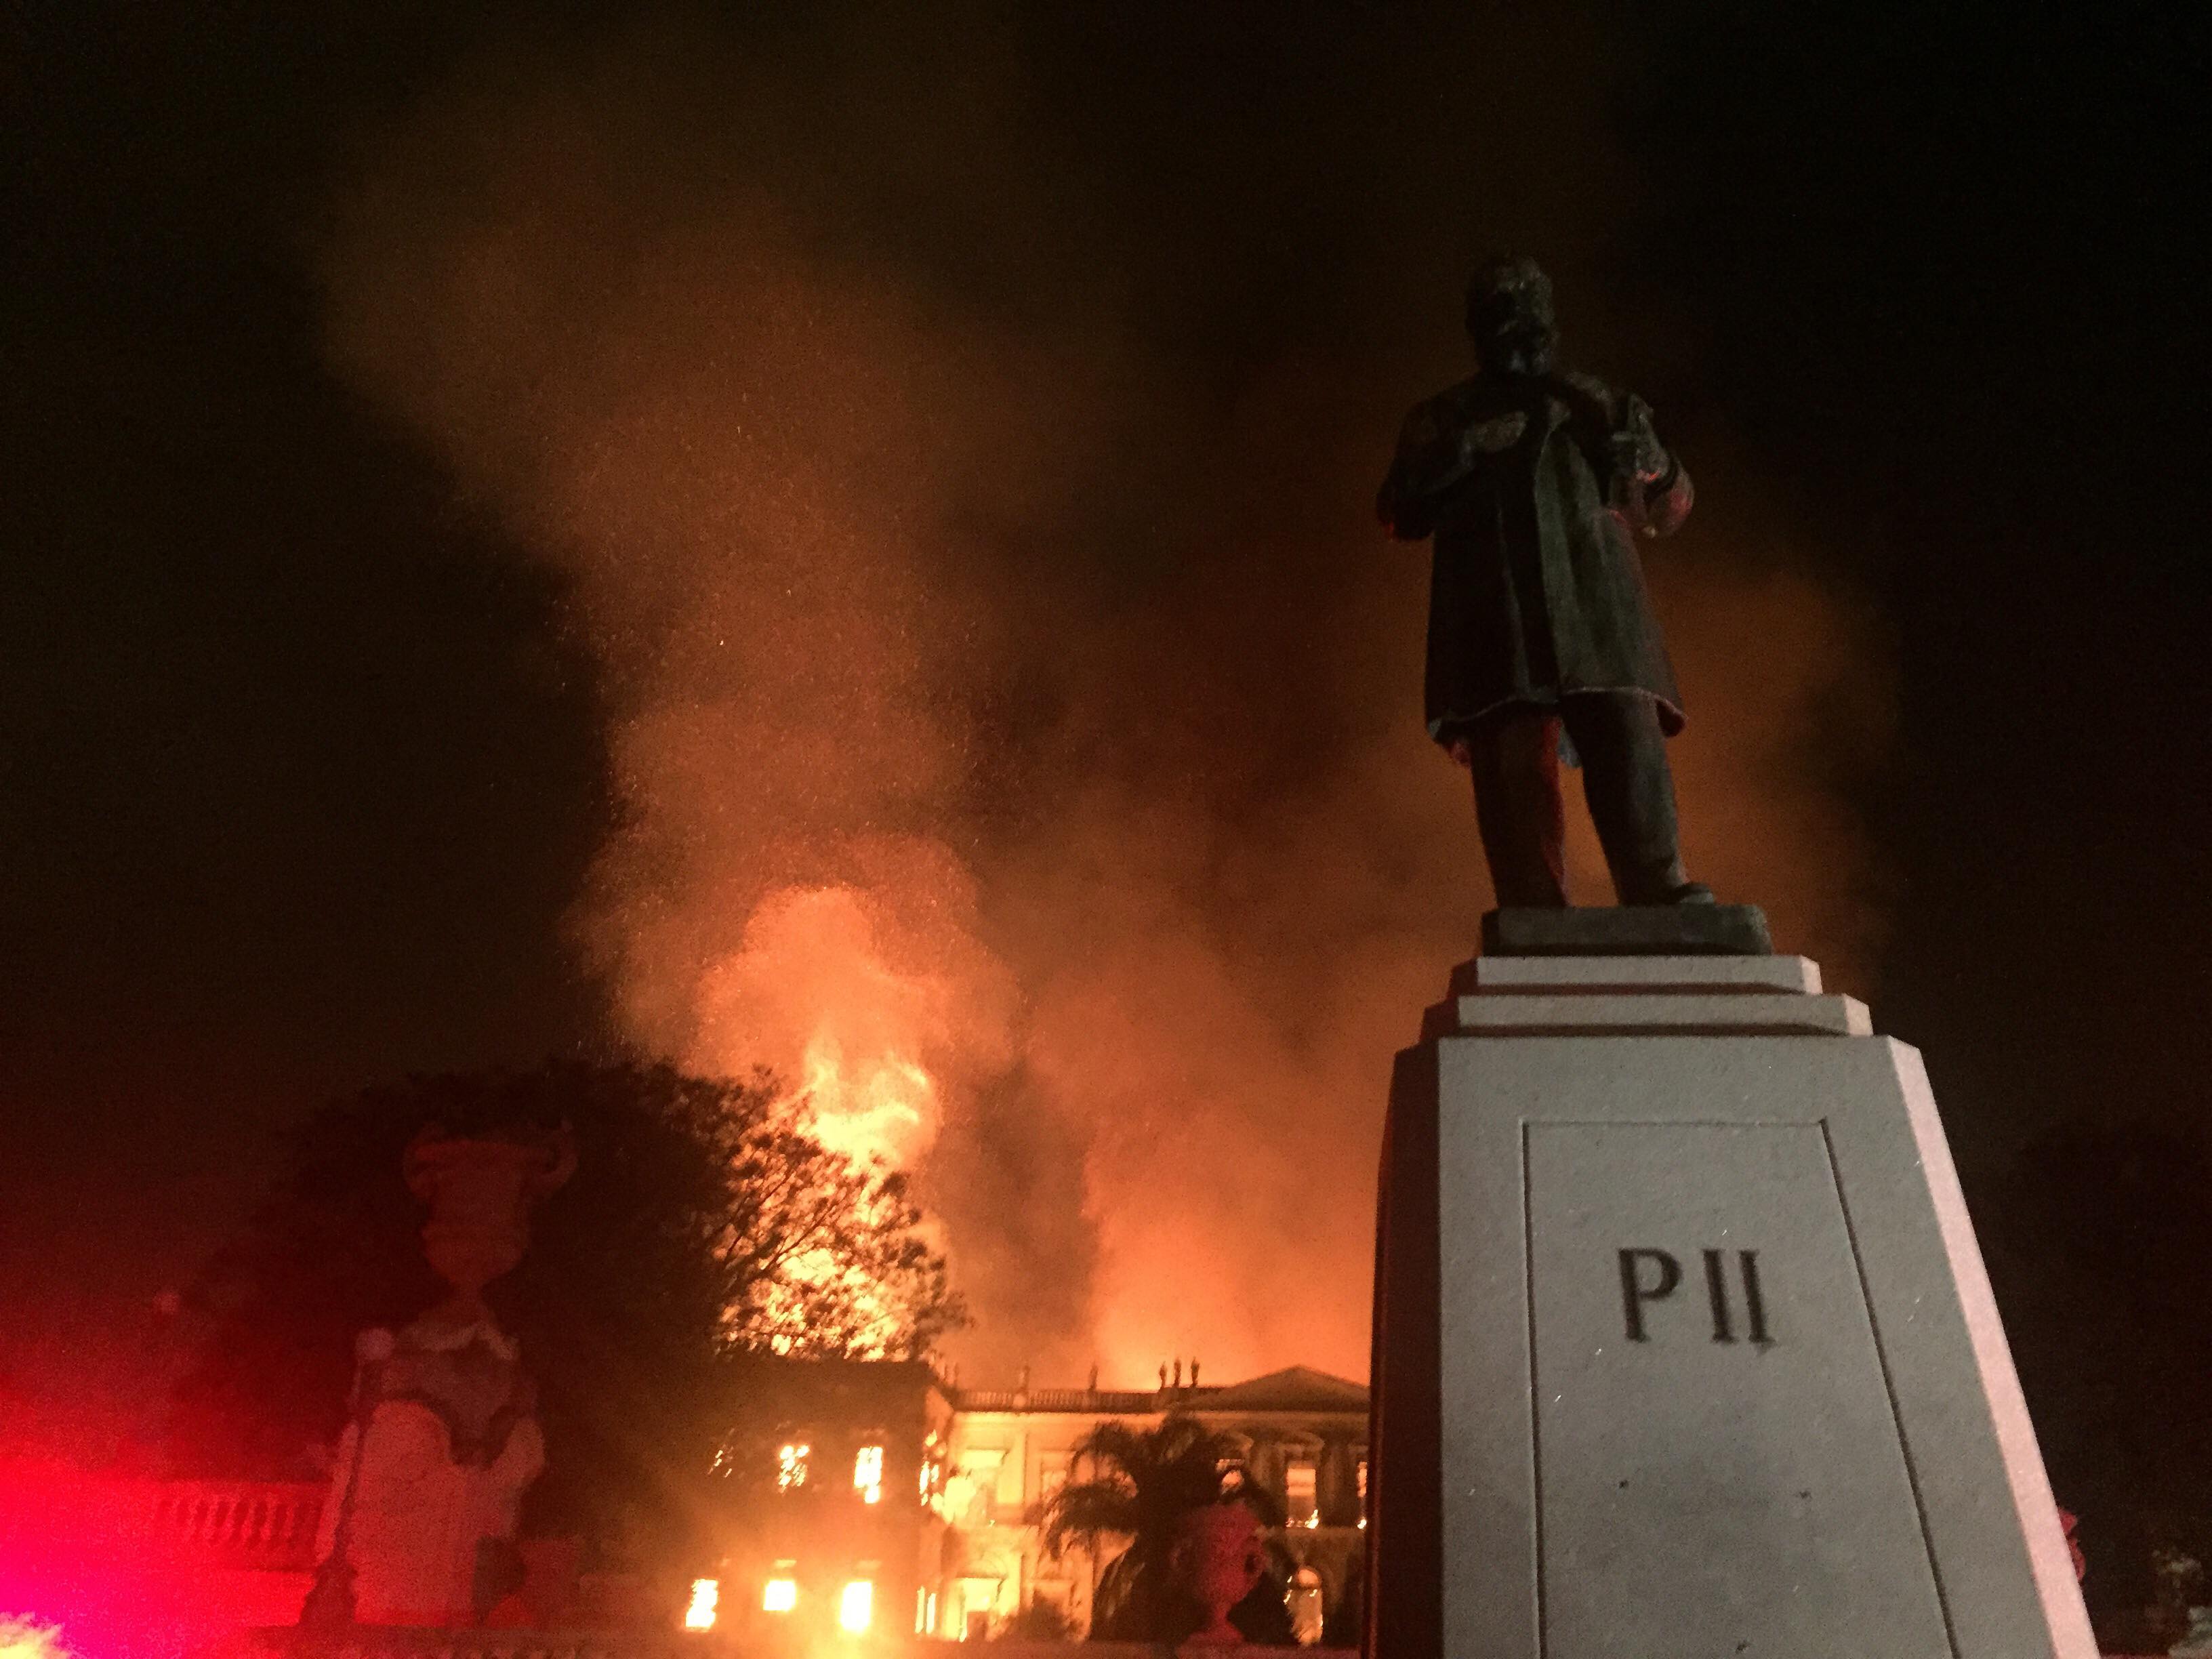 Fire at the National Museum of Brazil, in Rio de Janeiro, on September 2, 2018. Photo by Felipe Milanez